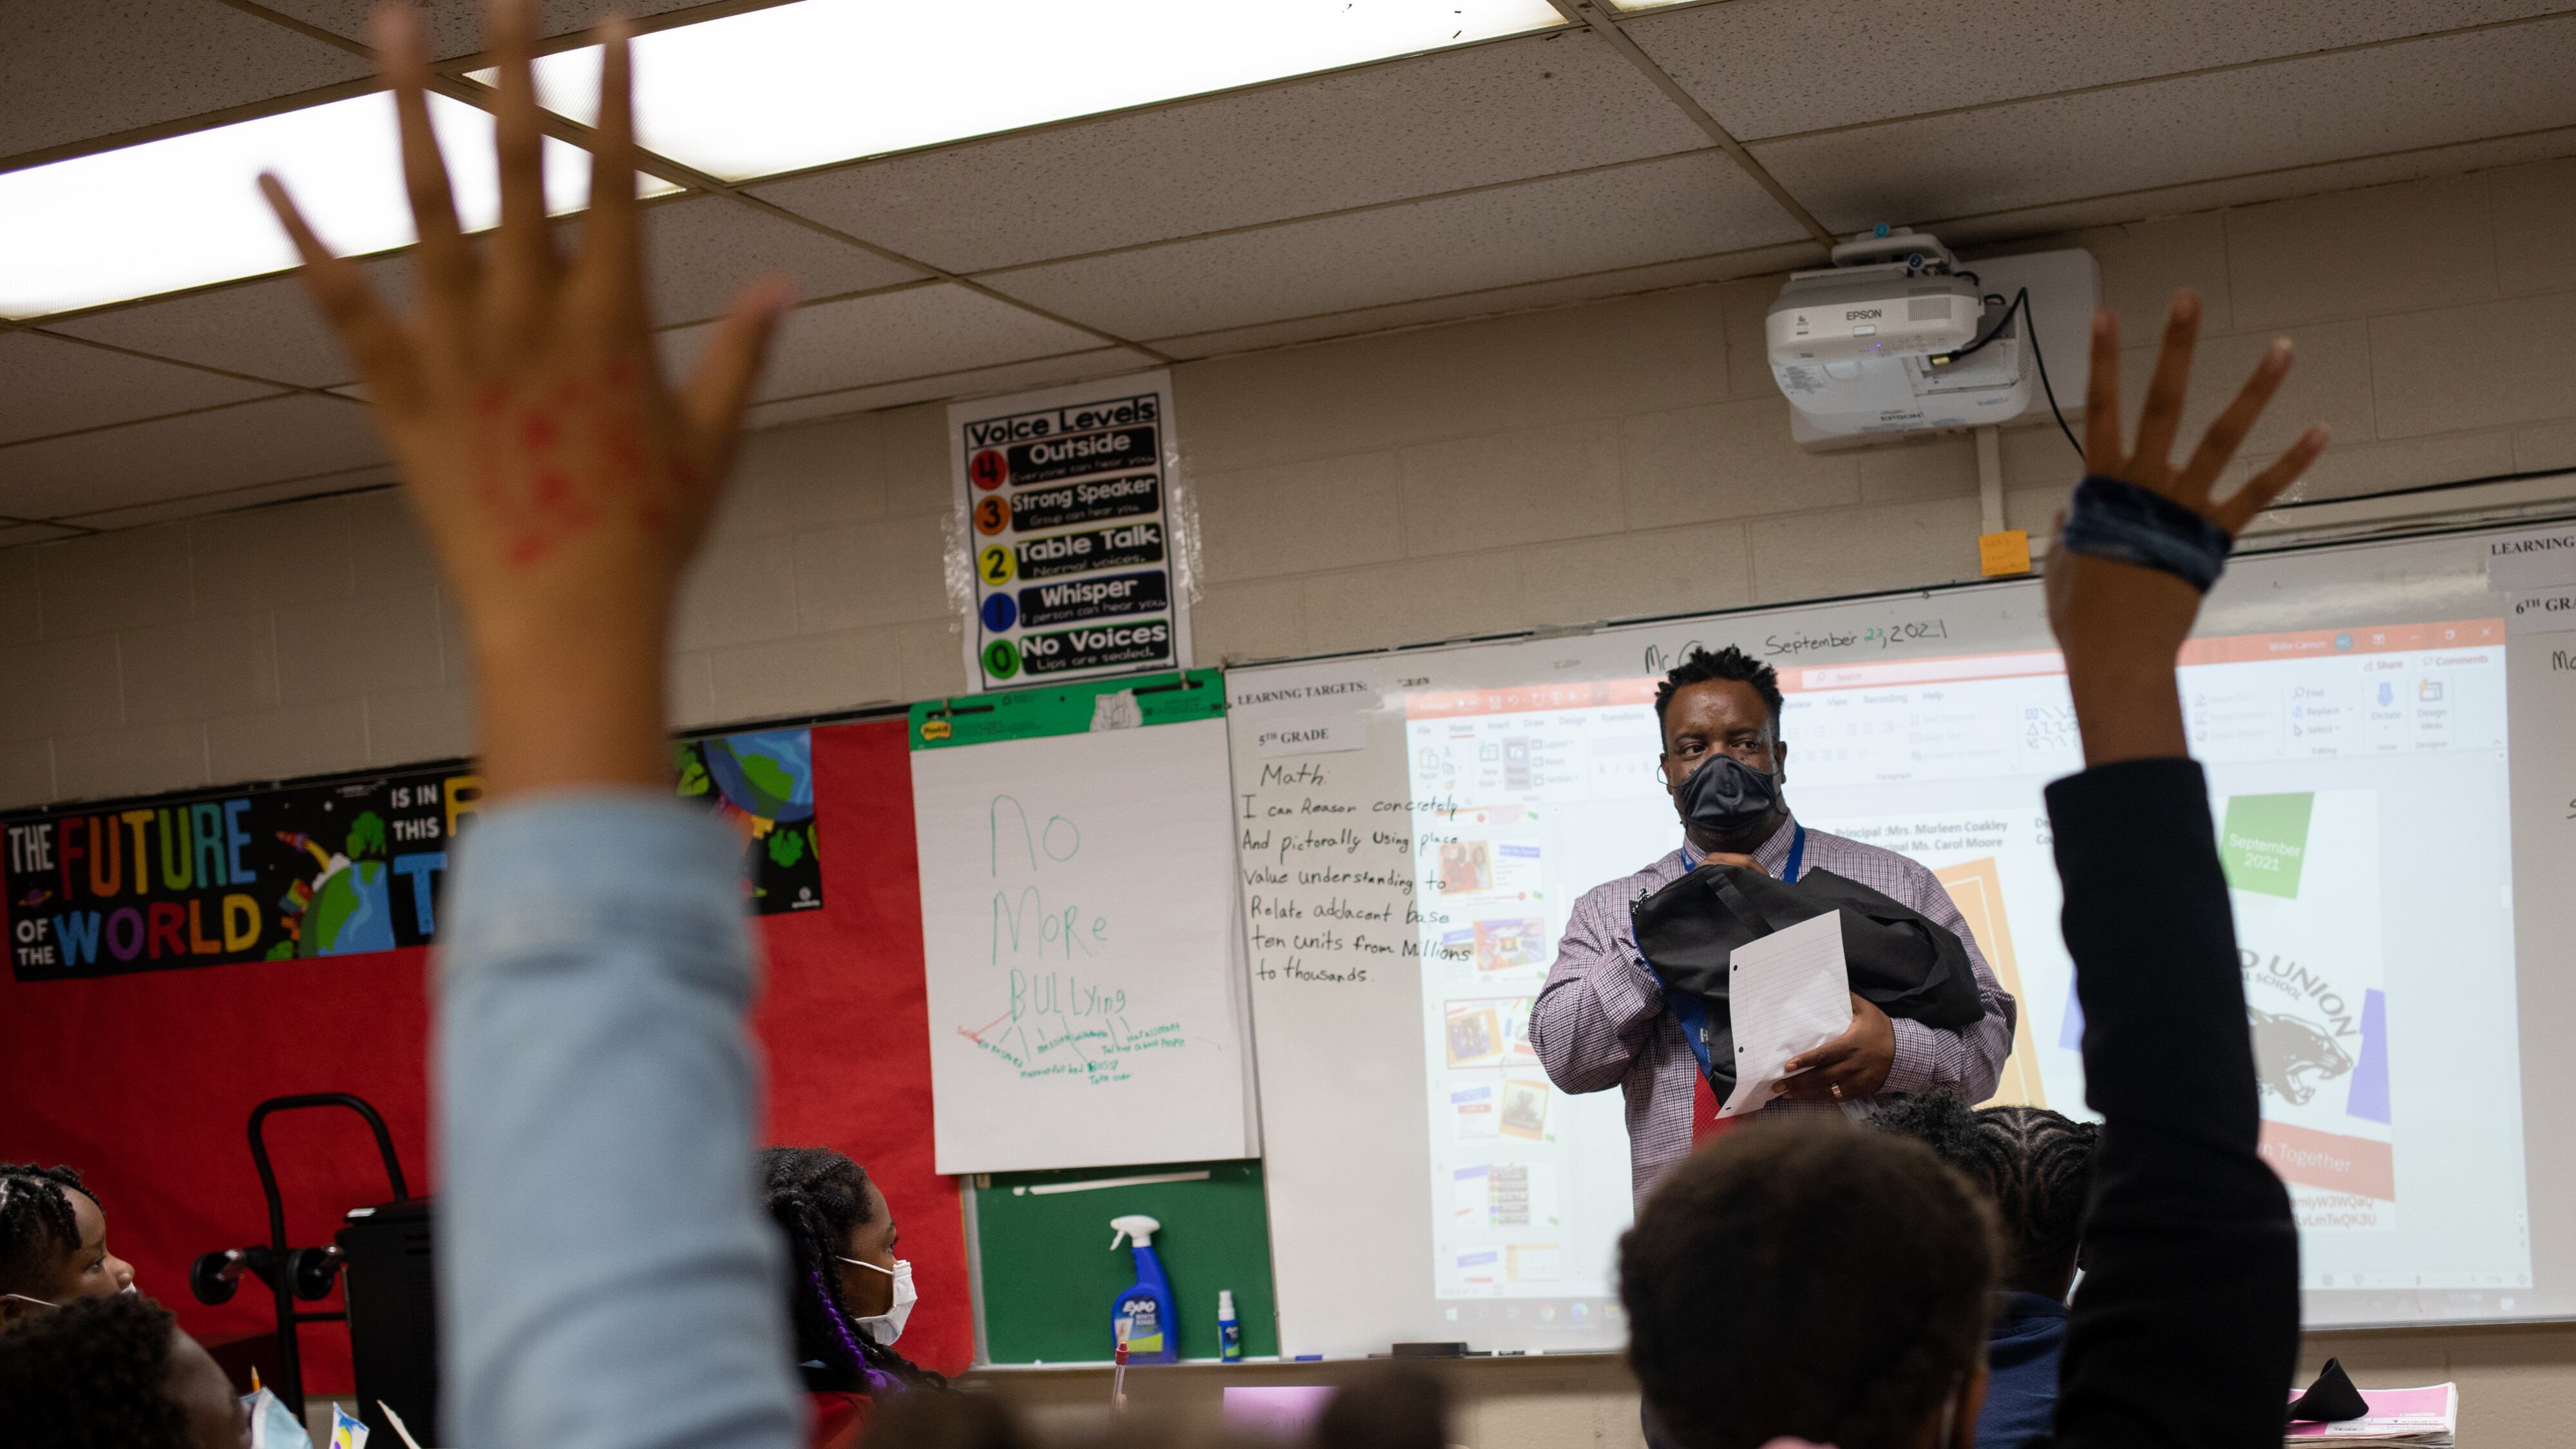 Students raise their hand in a classroom.